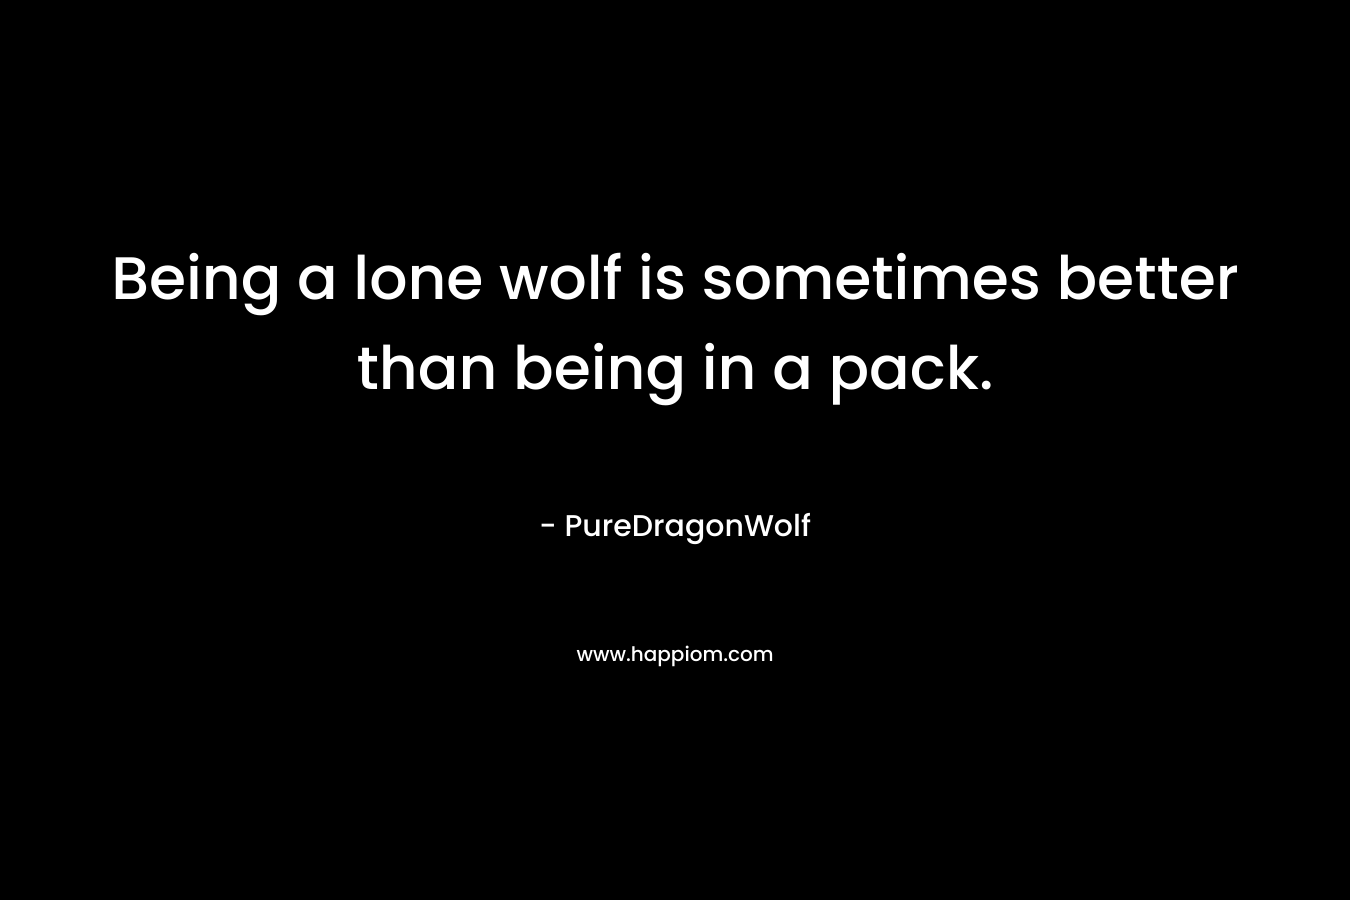 Being a lone wolf is sometimes better than being in a pack.